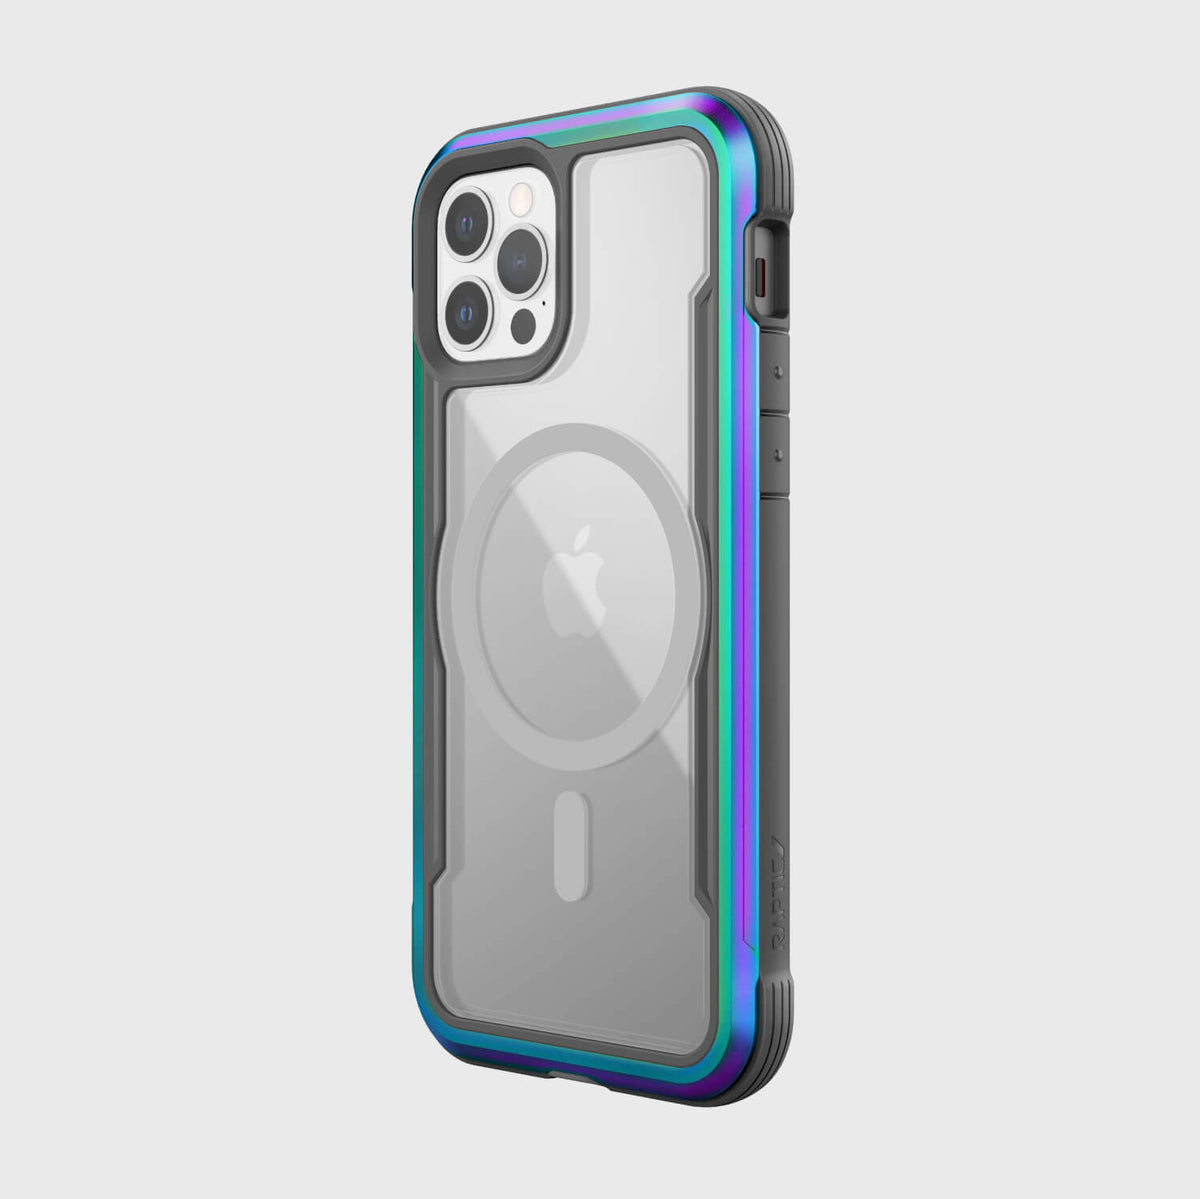 The iPhone 12 Pro Max Case - SHIELD PRO MAGNET by Raptic is shown in blue and silver, compatible with MagSafe chargers for a 15W charging rate.